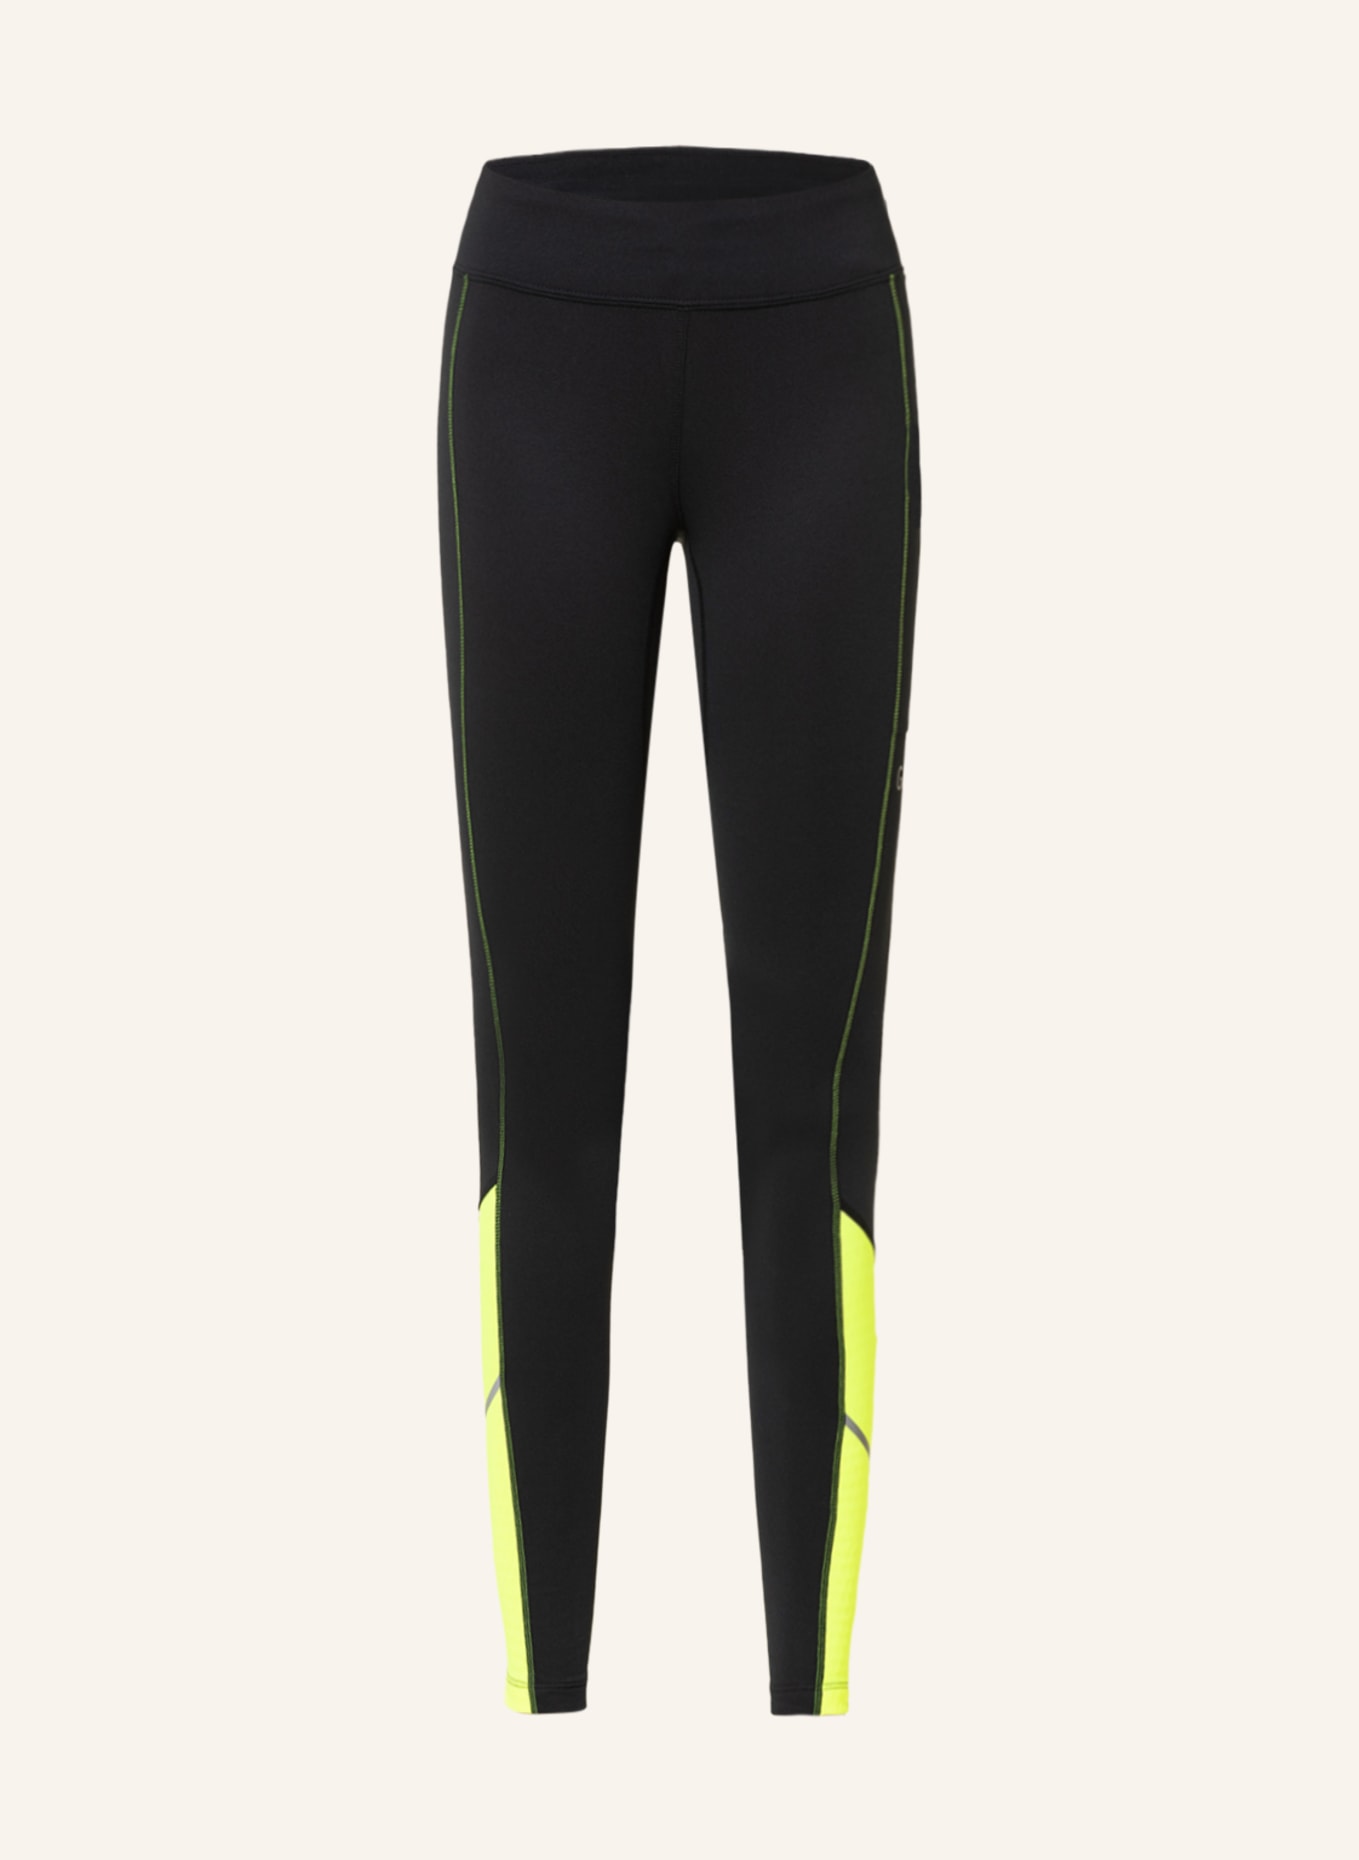 GORE RUNNING WEAR 7/8 tights R3, Color: BLACK/ NEON YELLOW (Image 1)